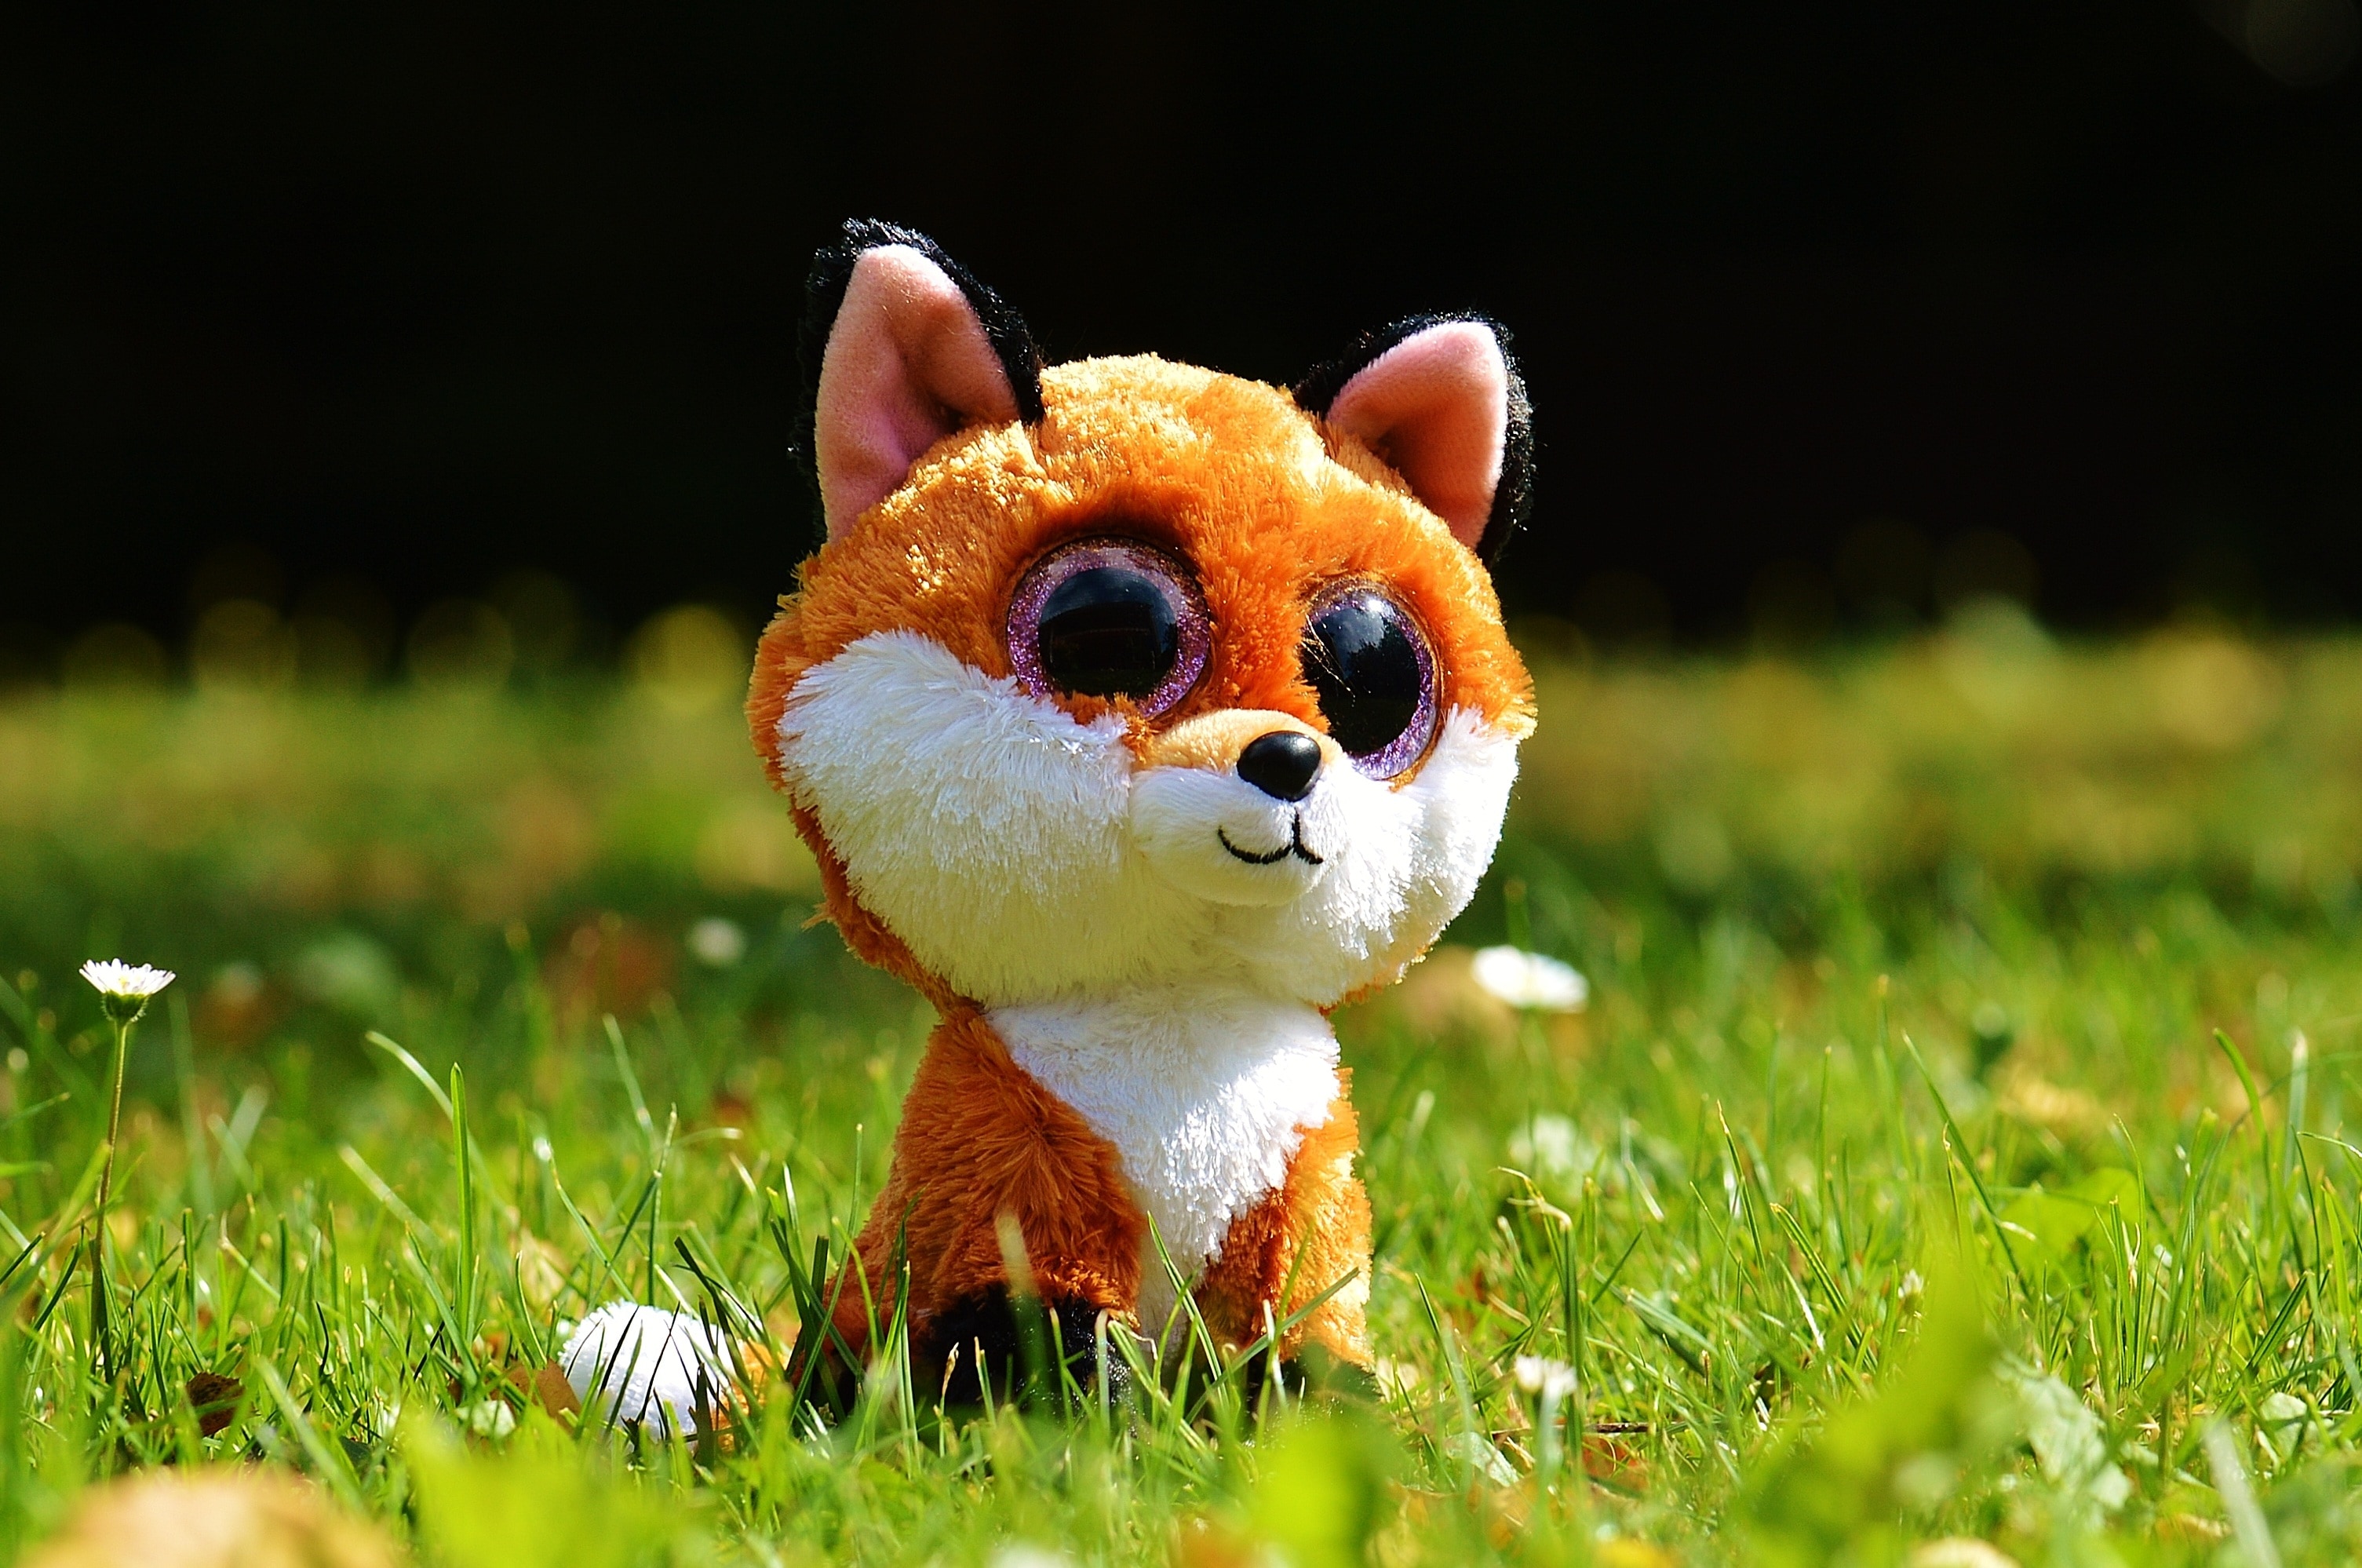 white and brown plush toy on grass